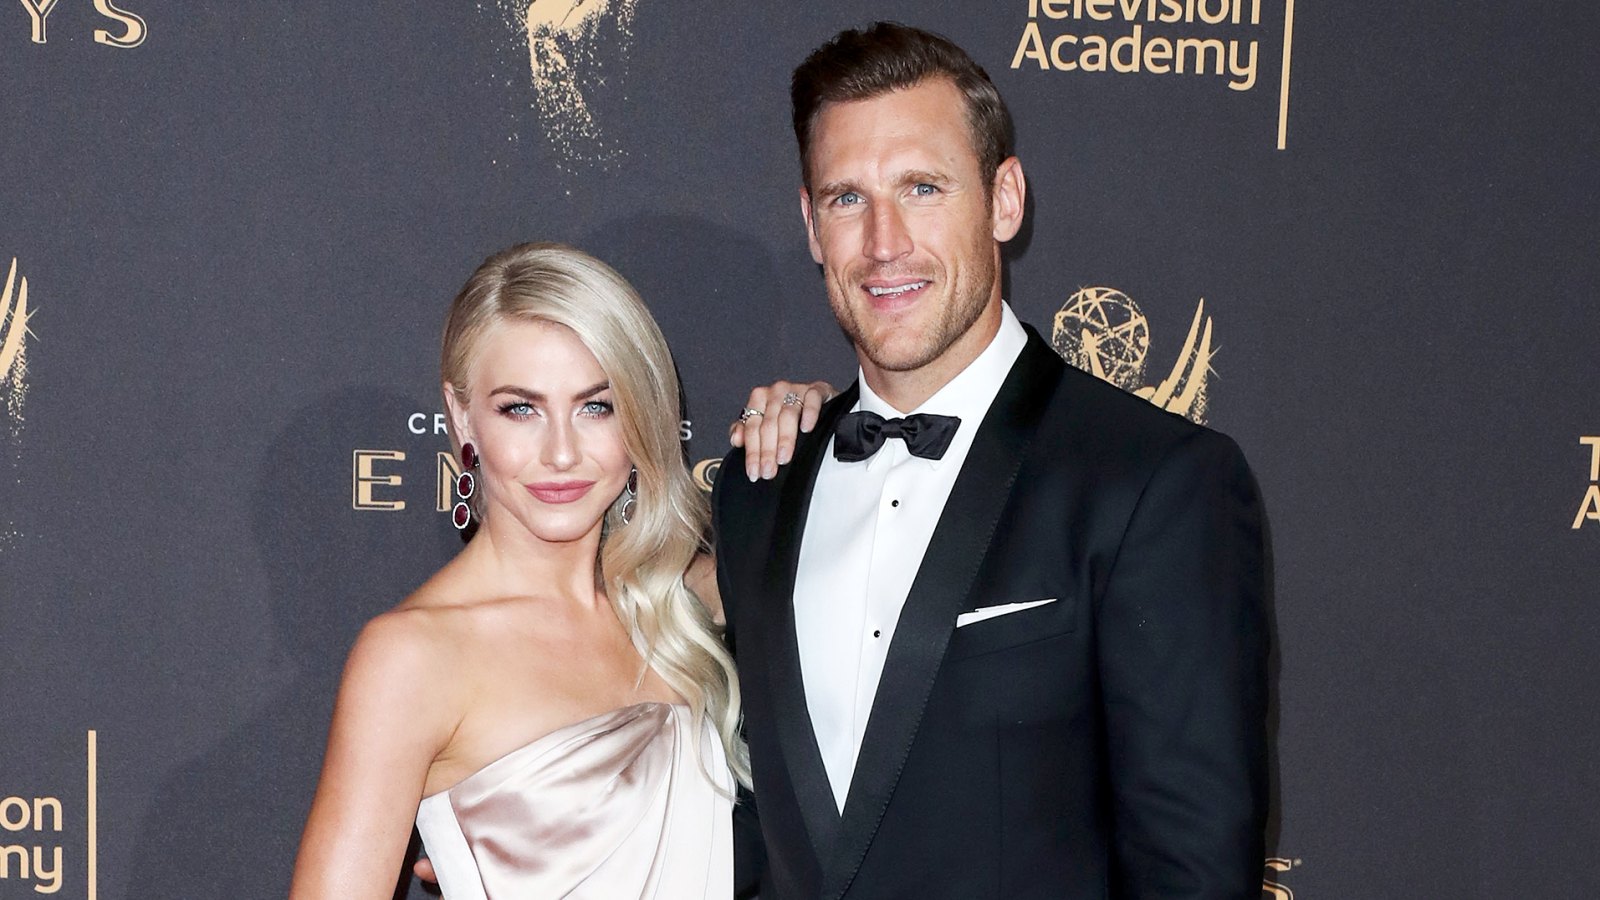 Julianne-Hough-Posts-Cryptic-Quote-Amid-Brooks-Laich-Marital-Drama